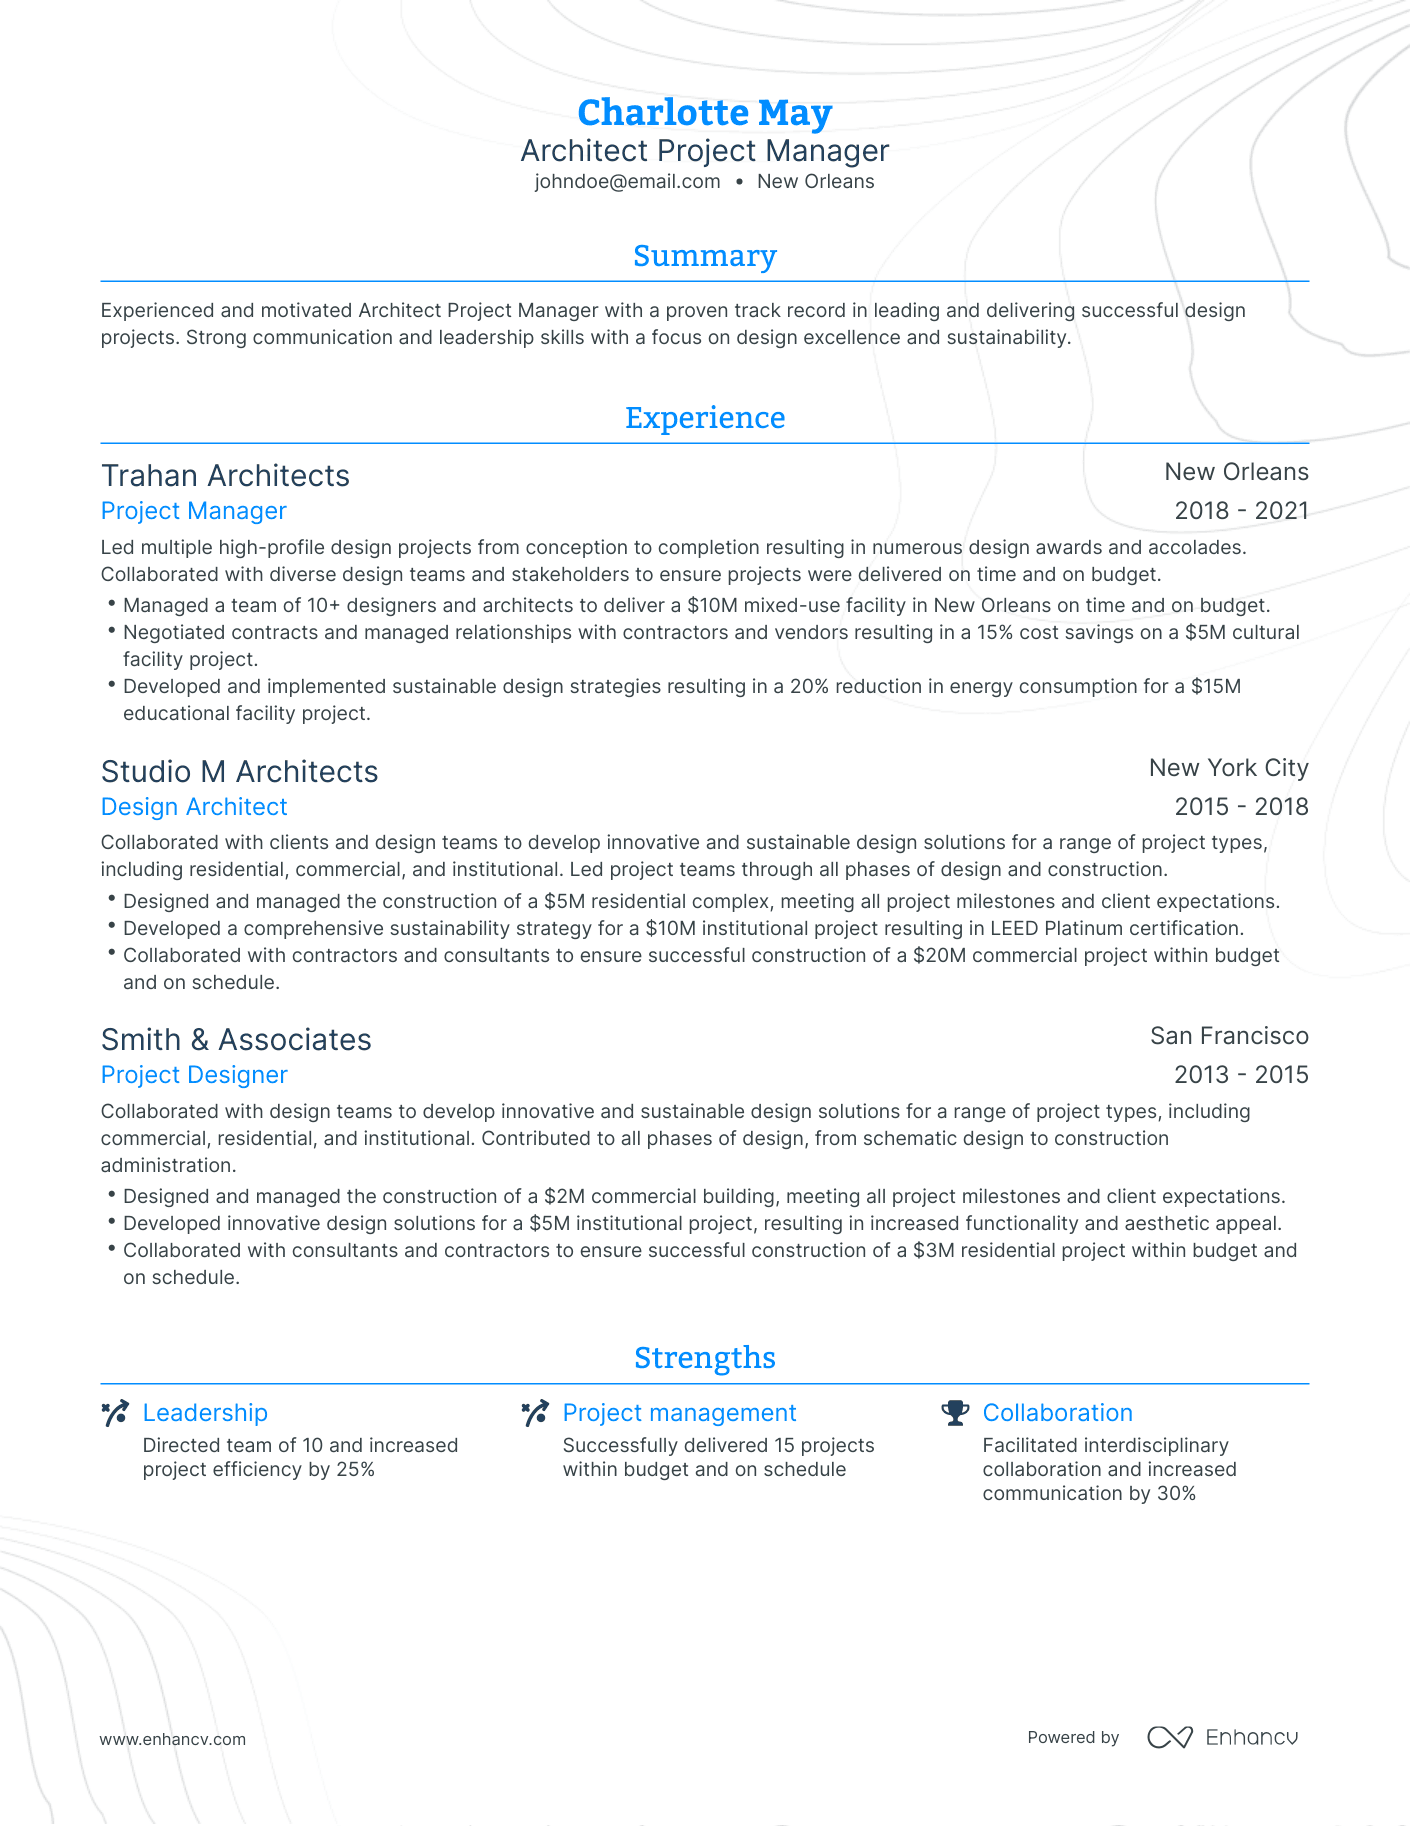 Traditional Architect Project Manager Resume Template